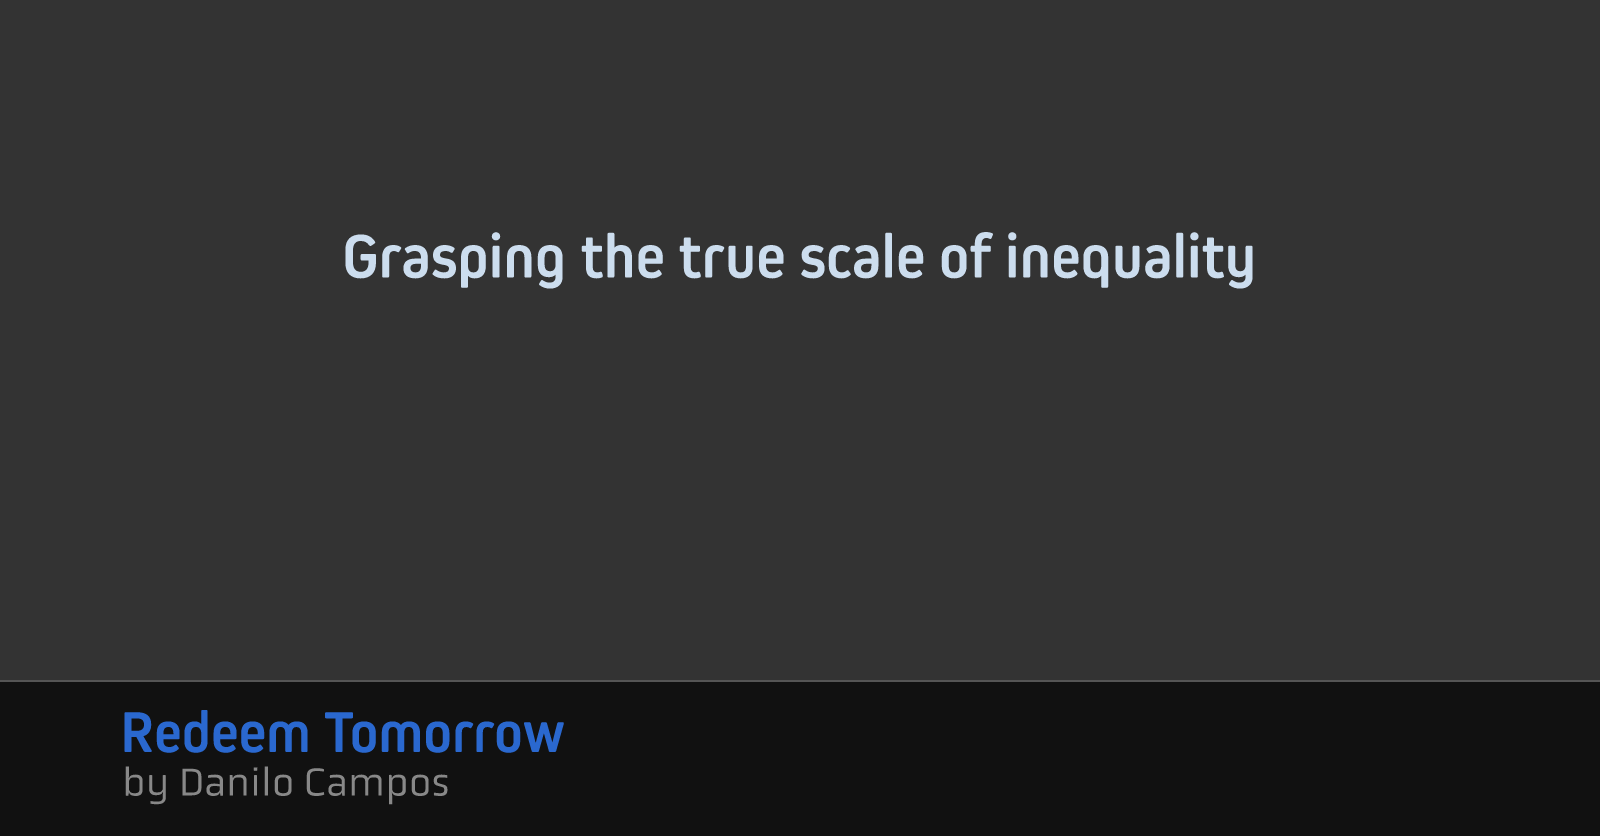 Grasping the true scale of inequality